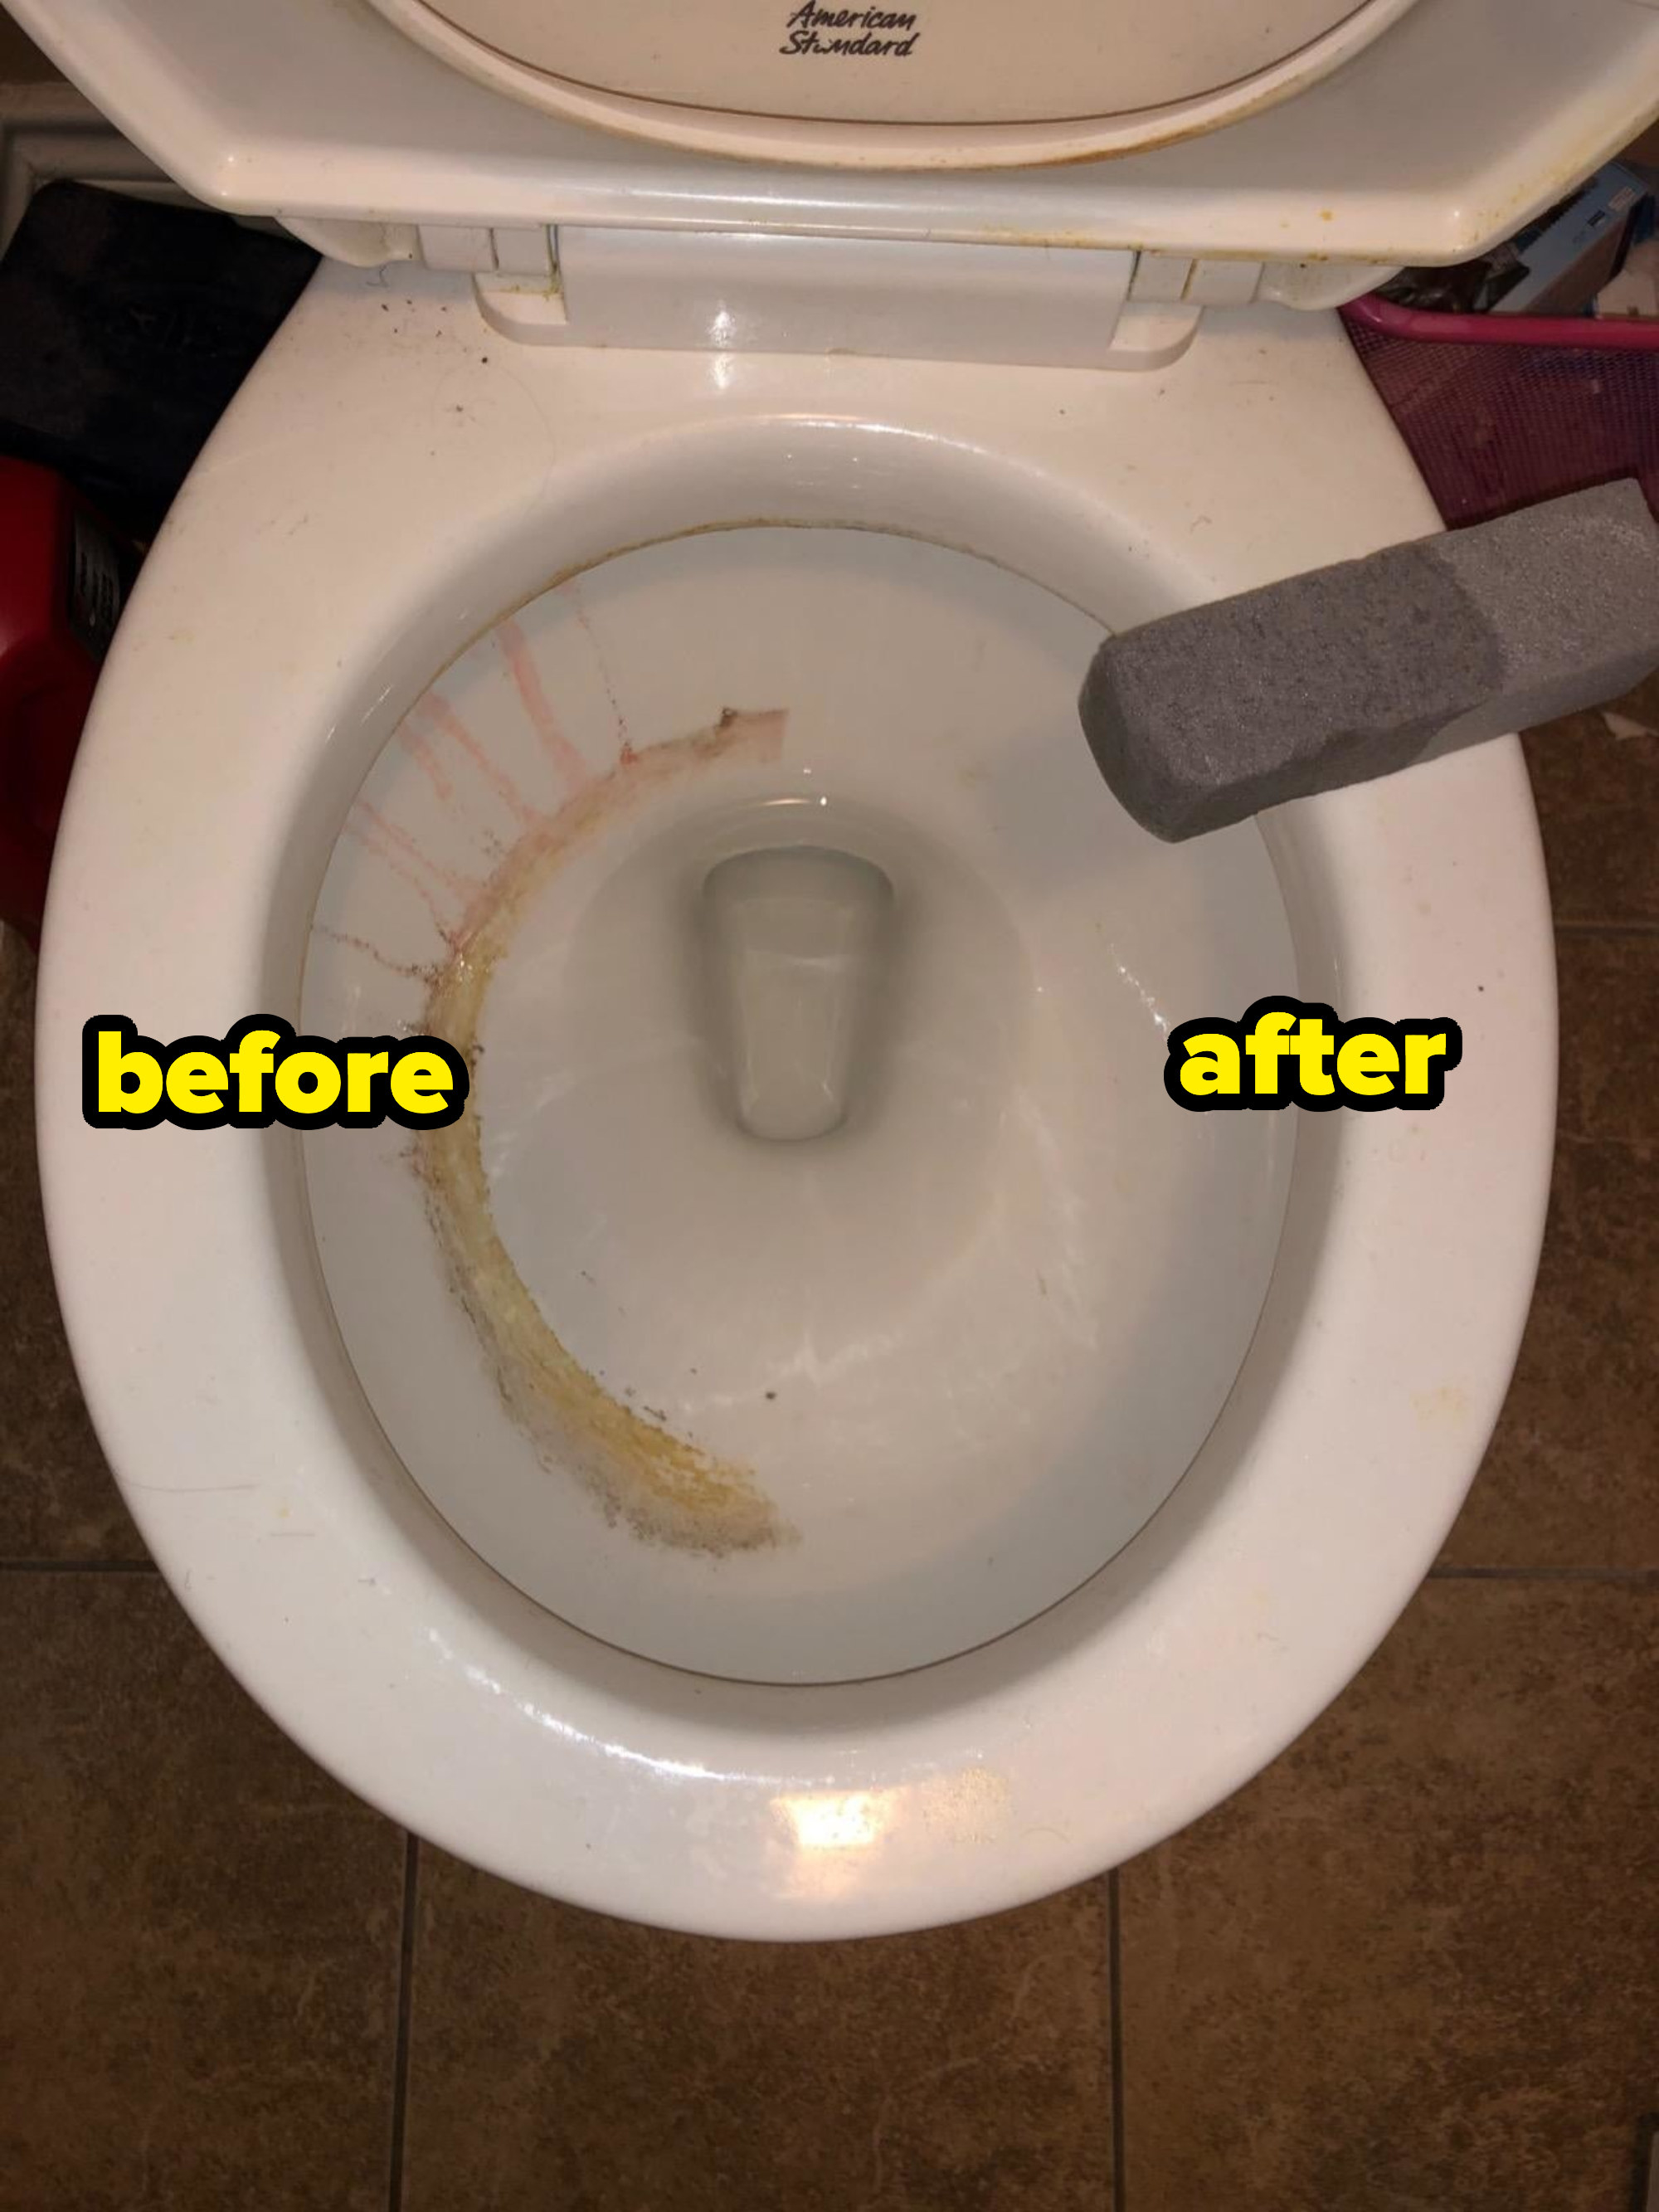 A reviewer&#x27;s toilet half cleaned to show how the pumice stone removed staining